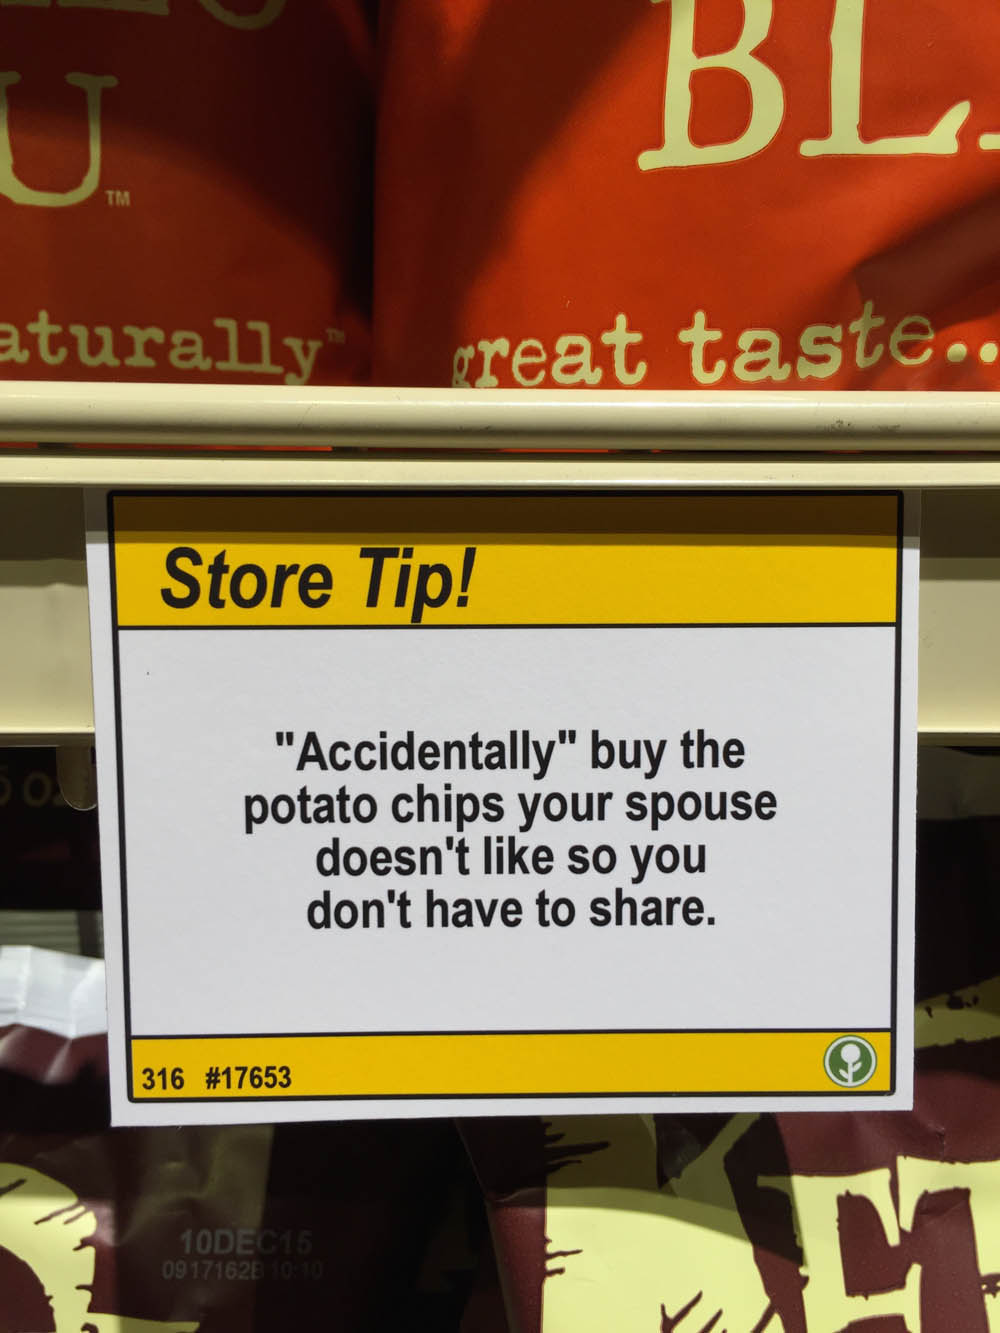 funny shopping tips - Bl Tm aturally creat taste.. Store Tip! "Accidentally" buy the potato chips your spouse doesn't so you don't have to . 316 10DEC15 0917162E m